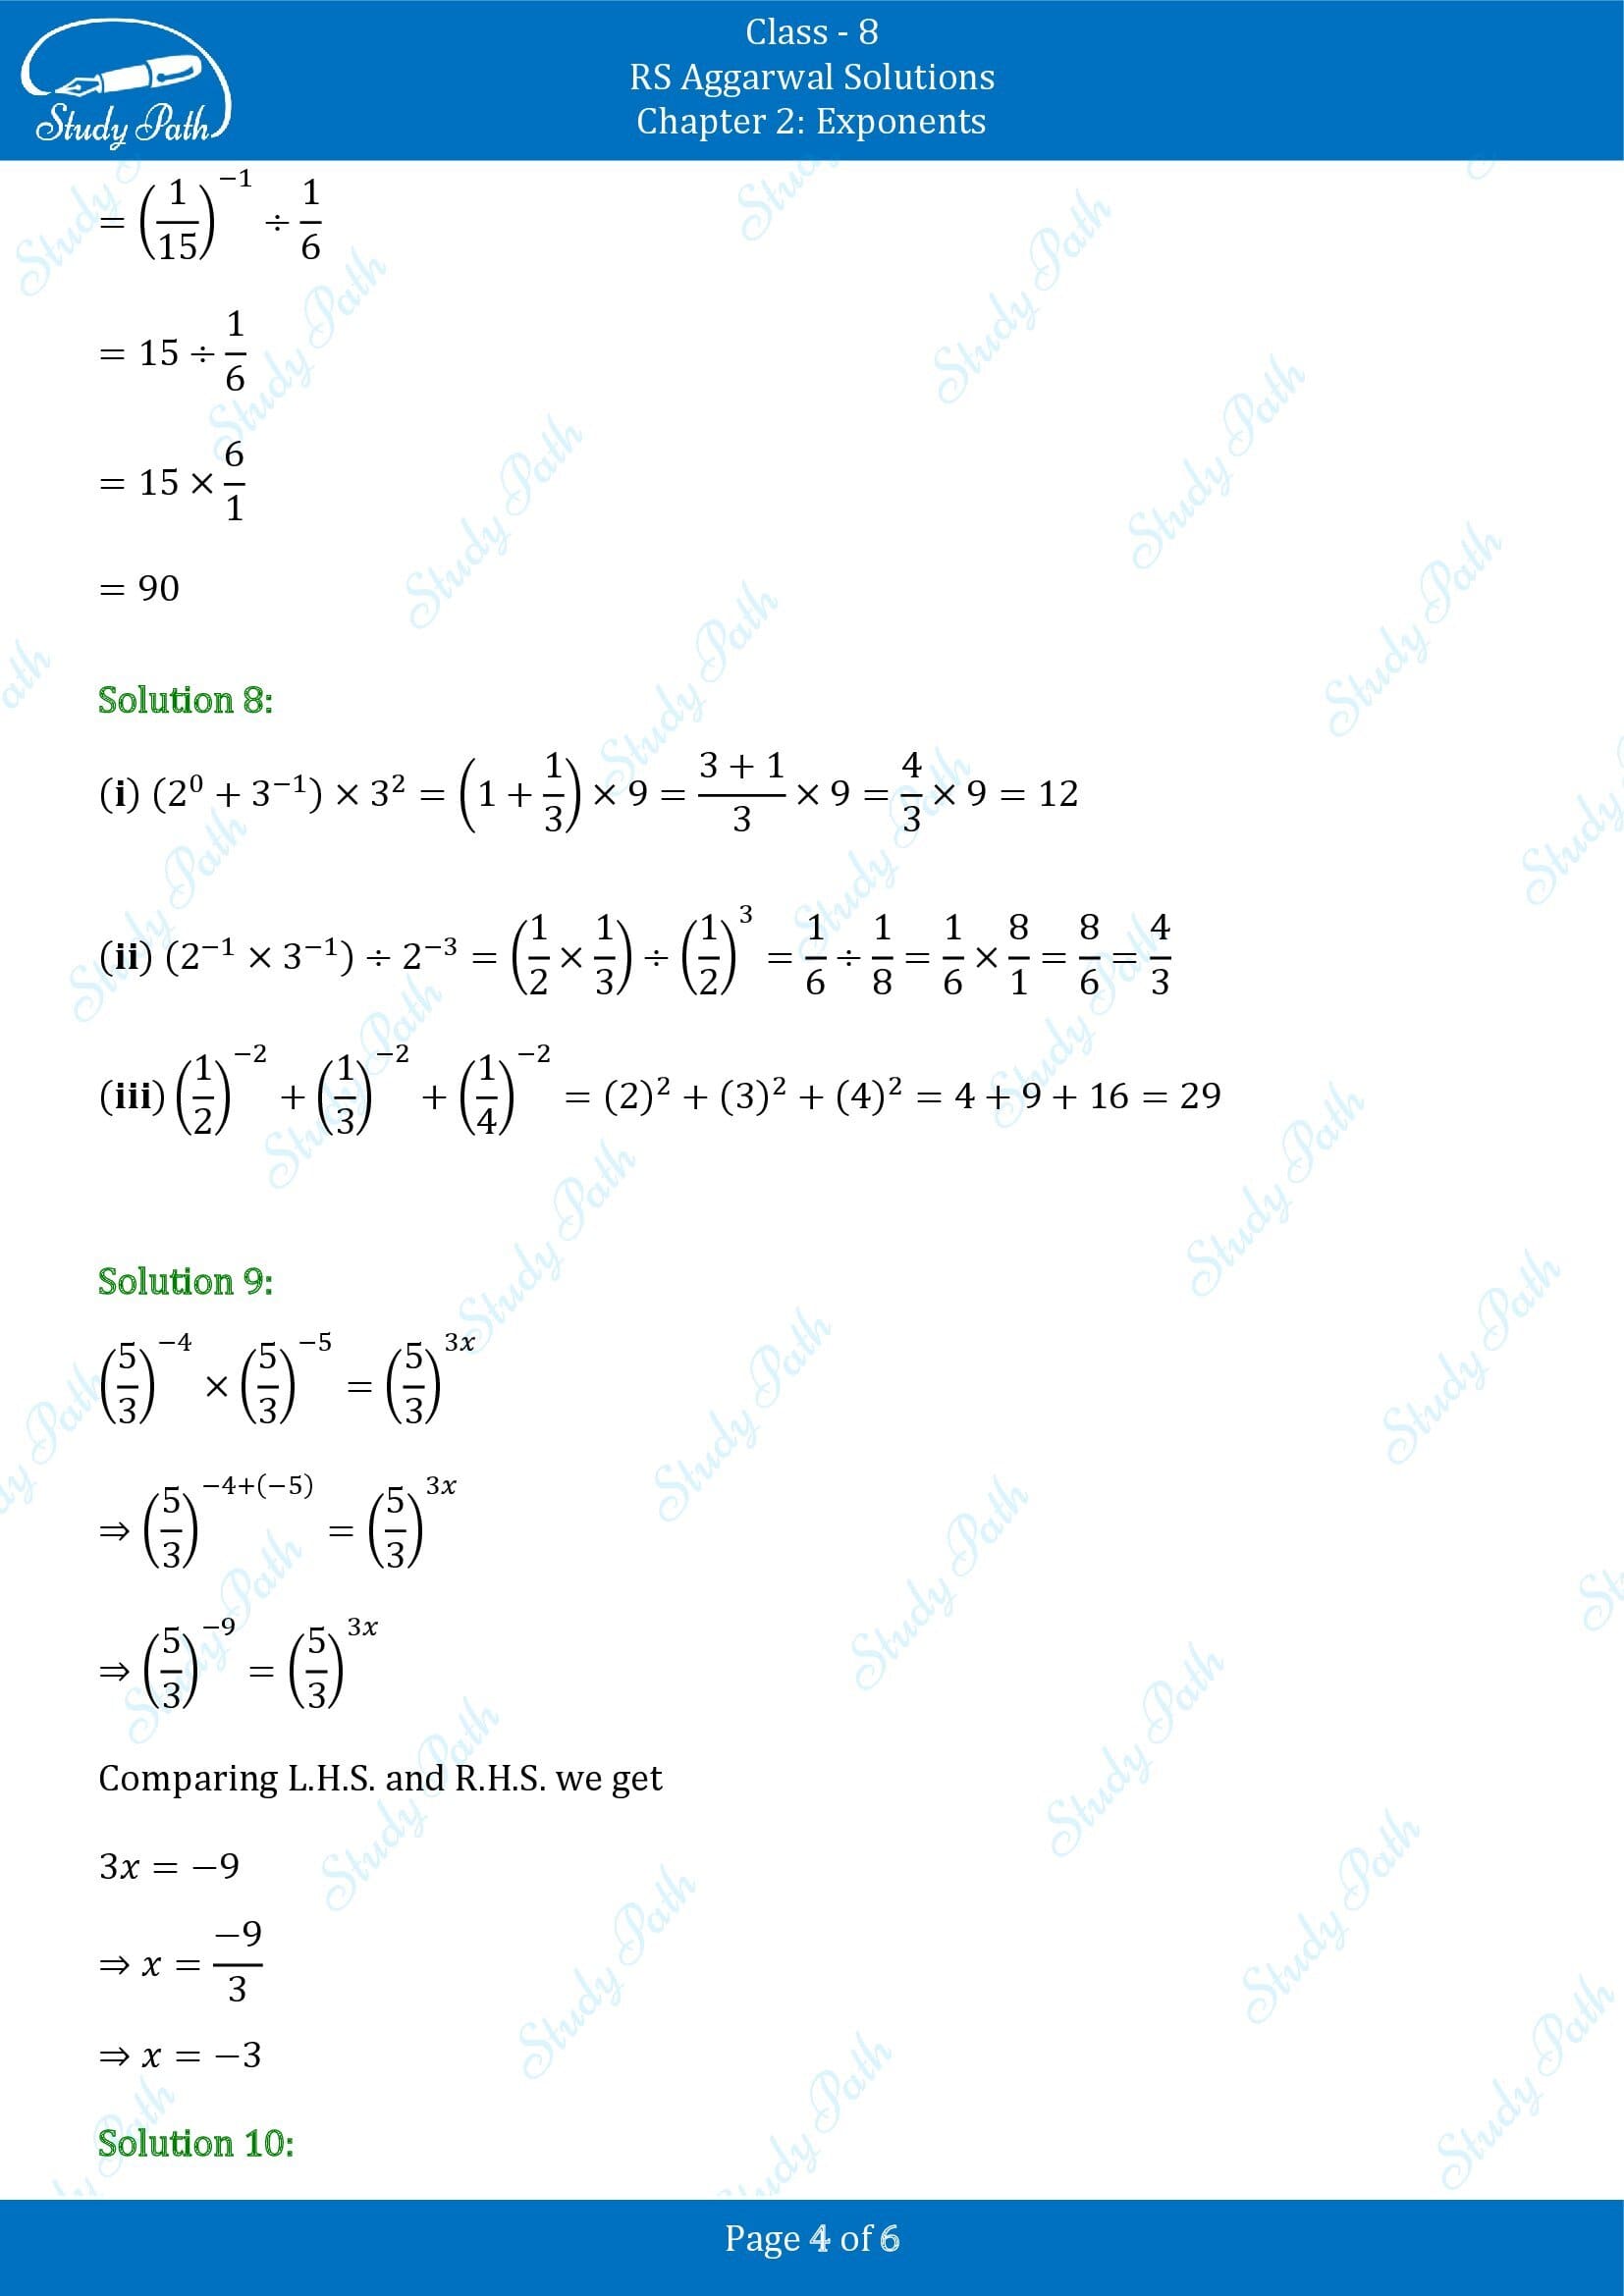 RS Aggarwal Solutions Class 8 Chapter 2 Exponents Exercise 2A 00004